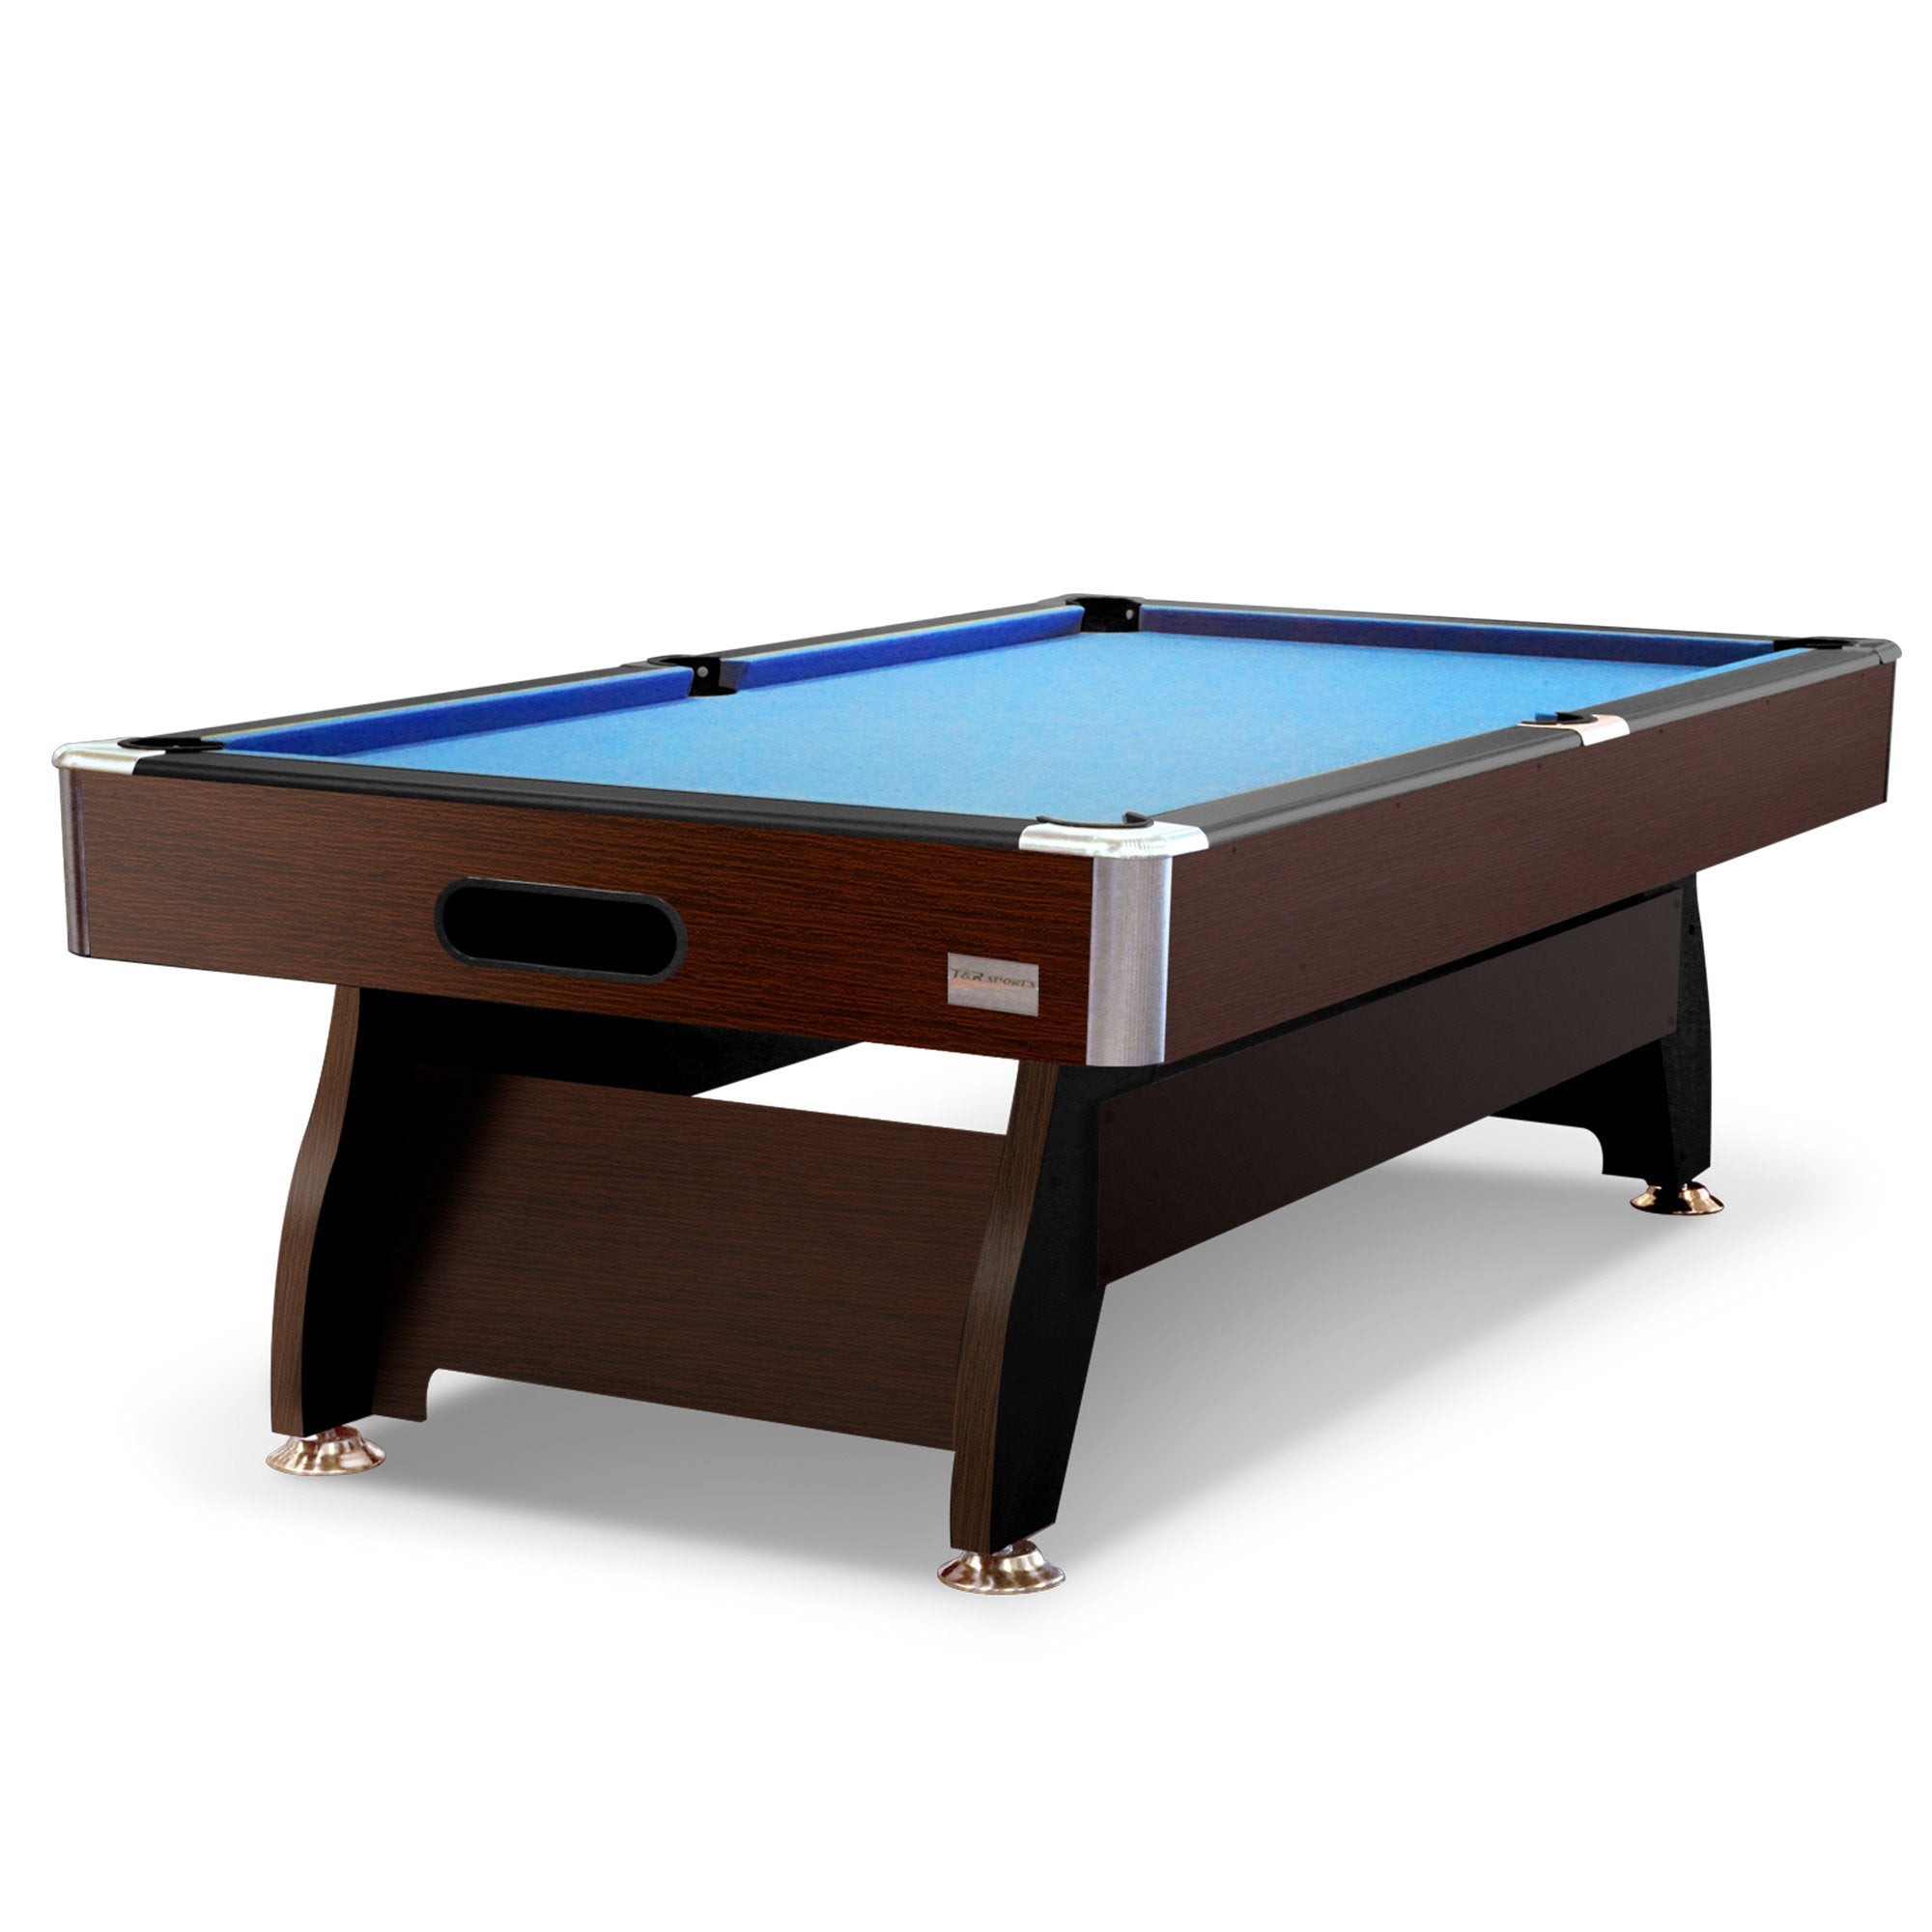 8FT MDF Pool Snooker Billiard Table with Accessories Pack, Walnut Frame